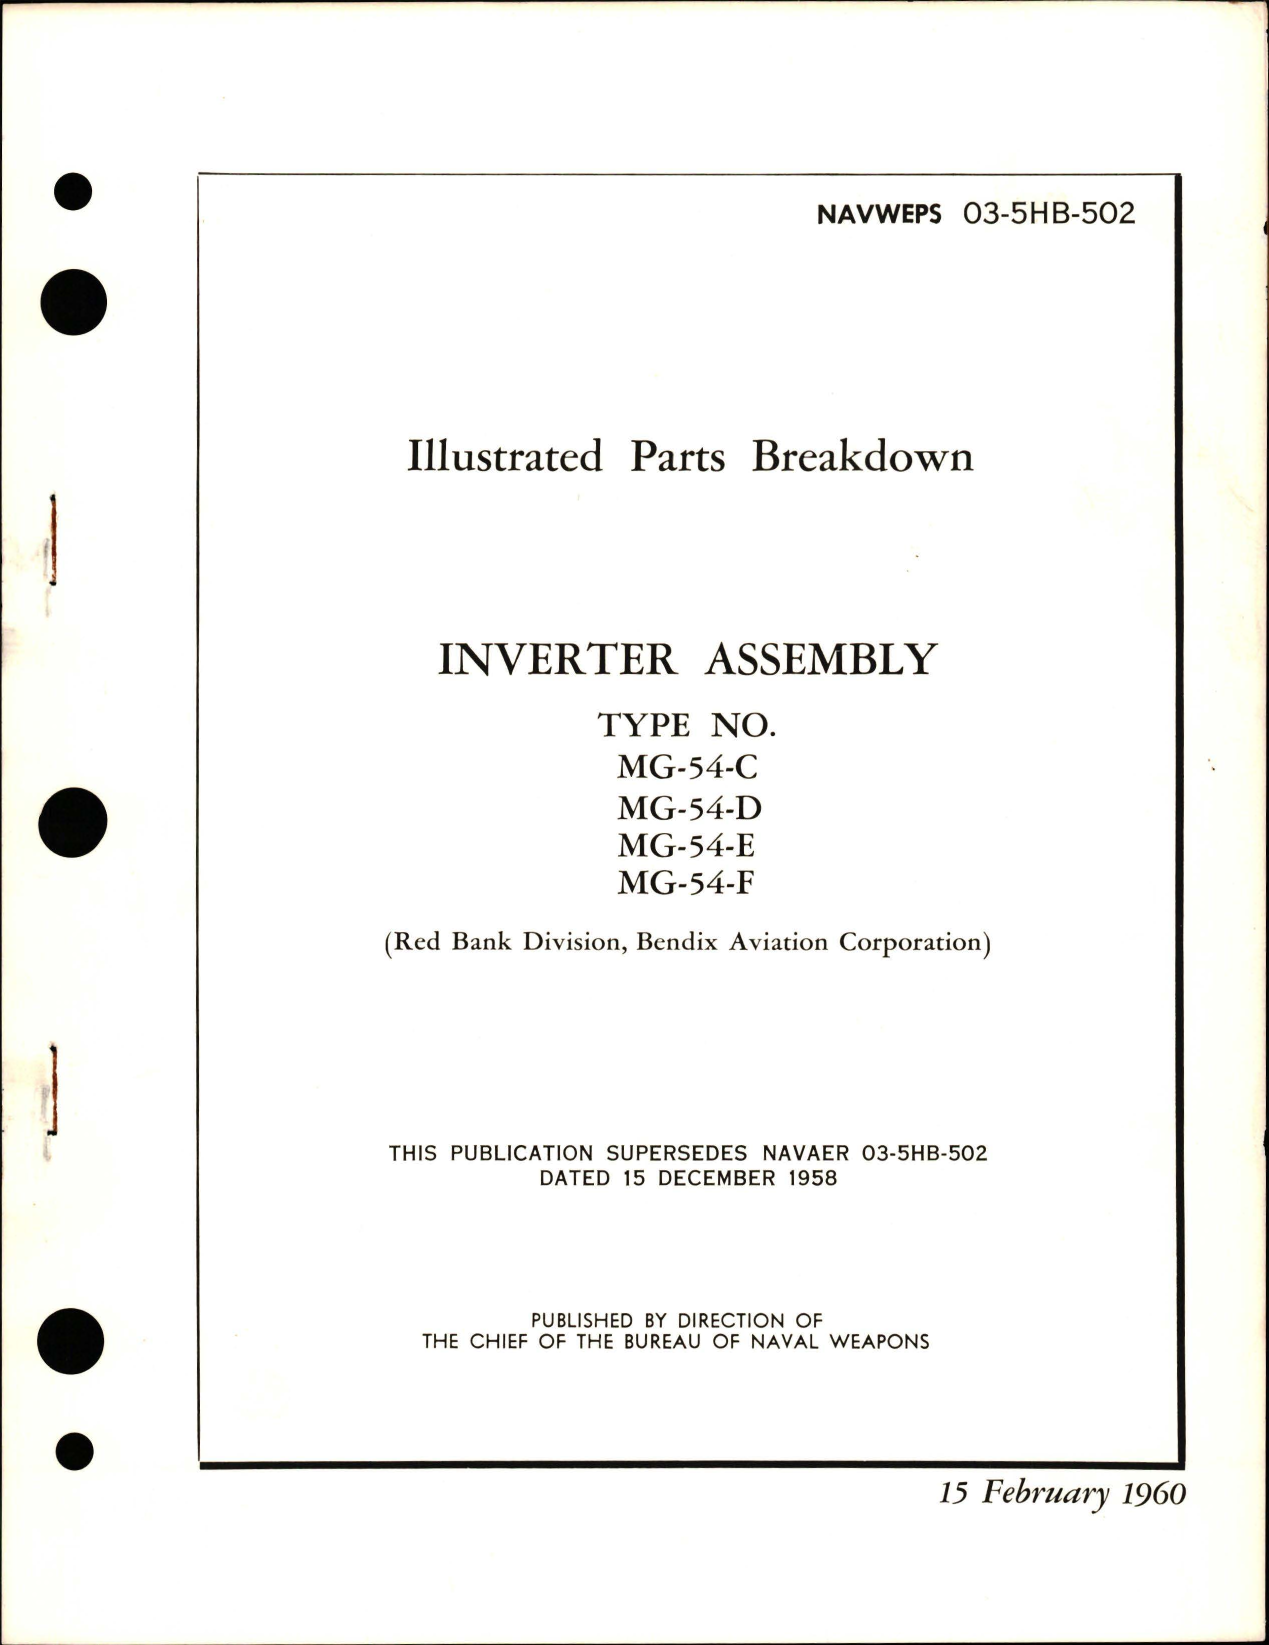 Sample page 1 from AirCorps Library document: Illustrated Parts Breakdown for Inverter Assembly - Types MG-54-C, MG-54-D, MG-54-E, and MG-54-F